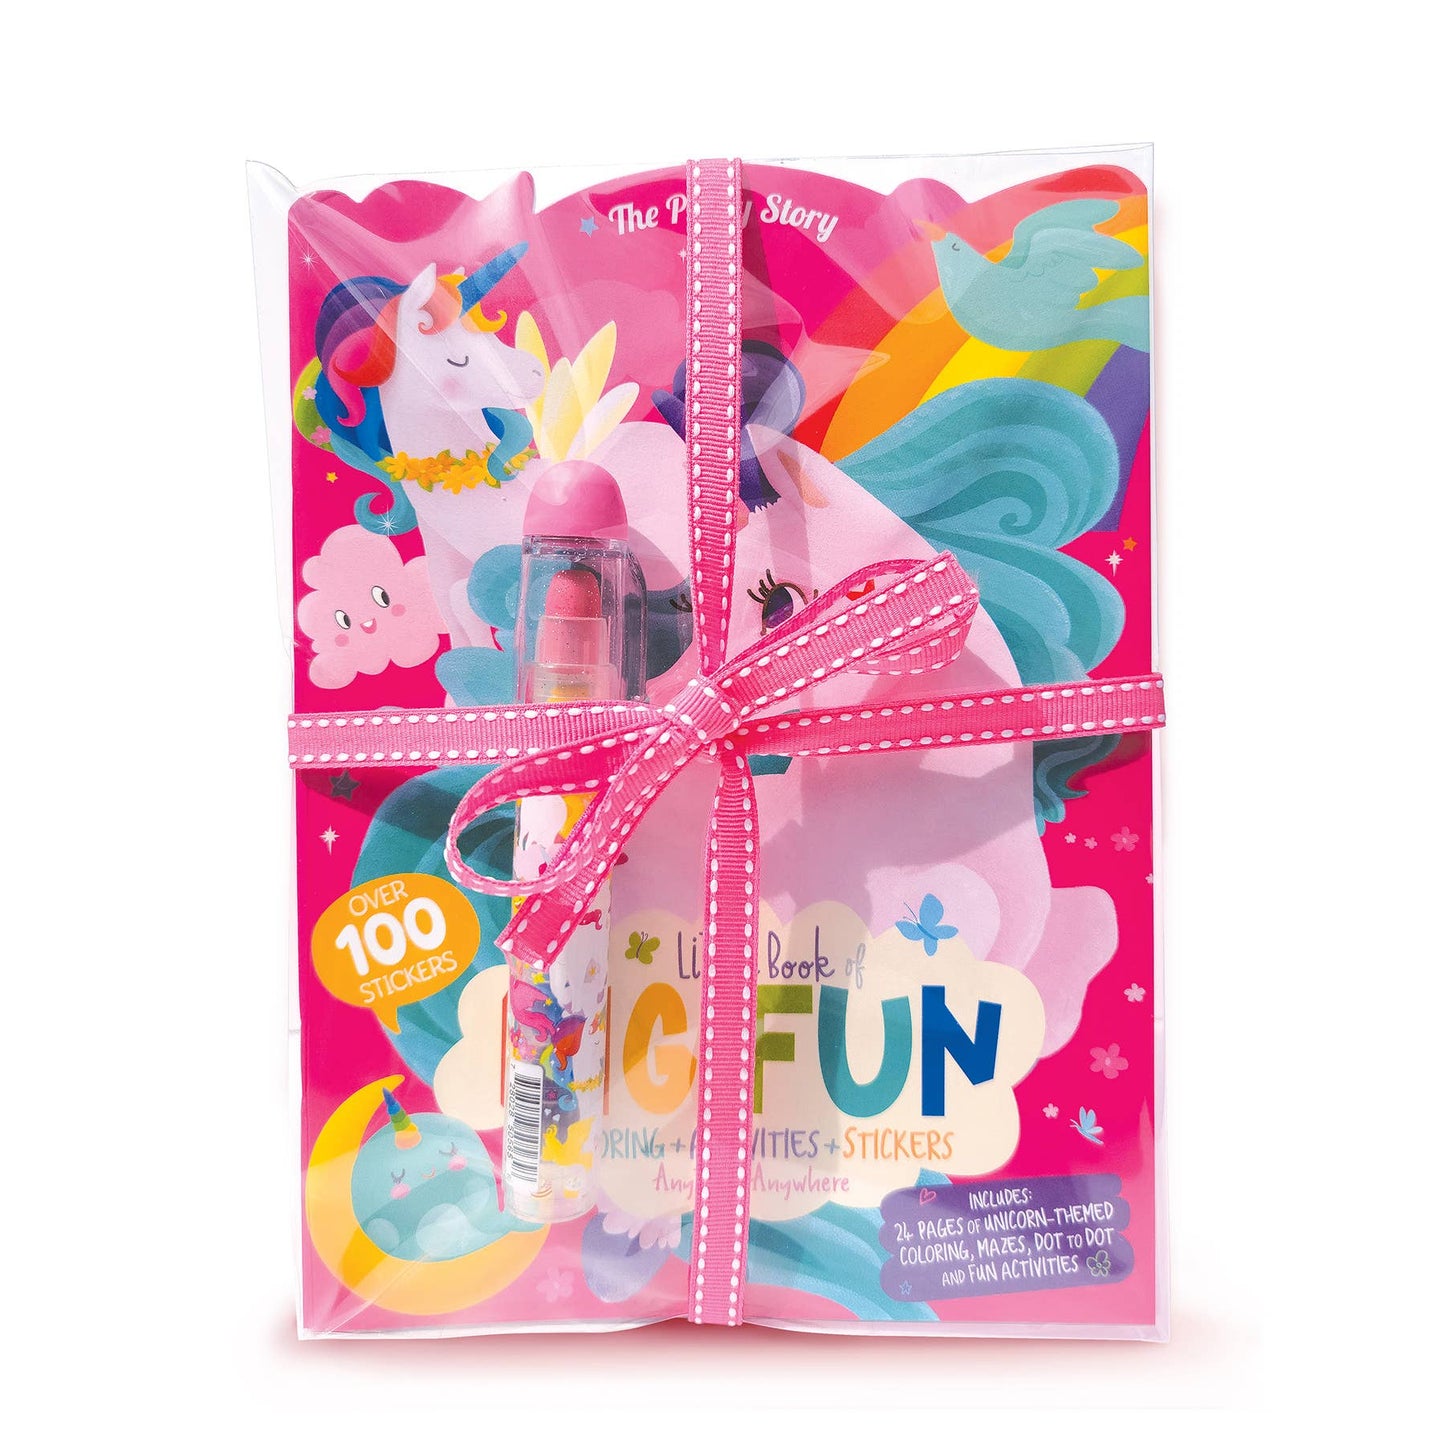 Unicorn Land Coloring Gift Pack for Kids